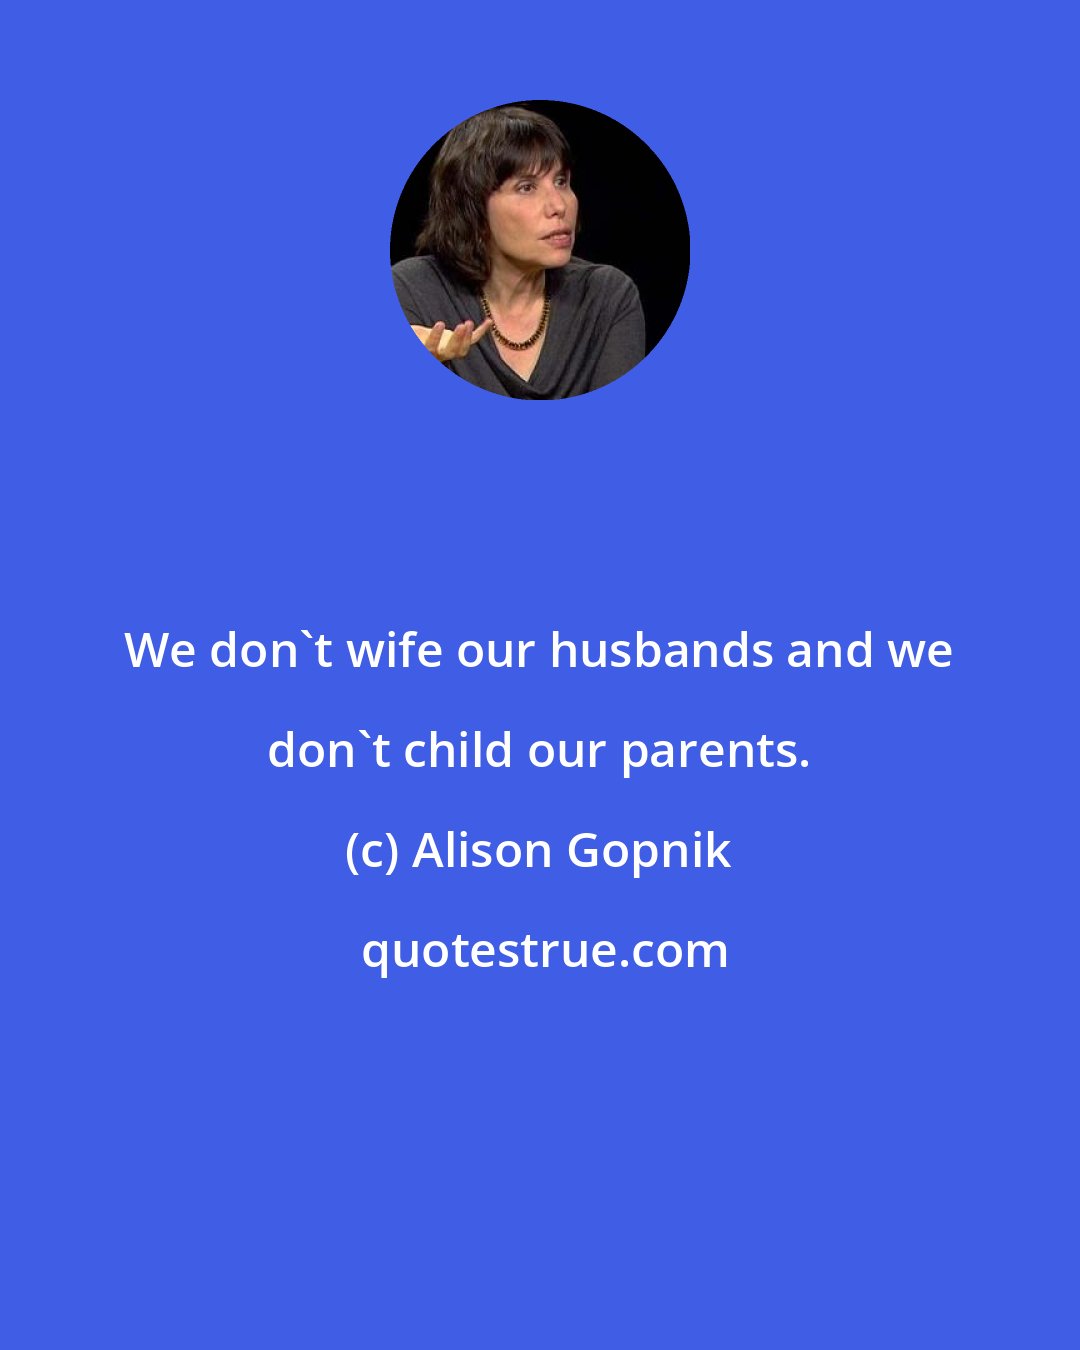 Alison Gopnik: We don't wife our husbands and we don't child our parents.